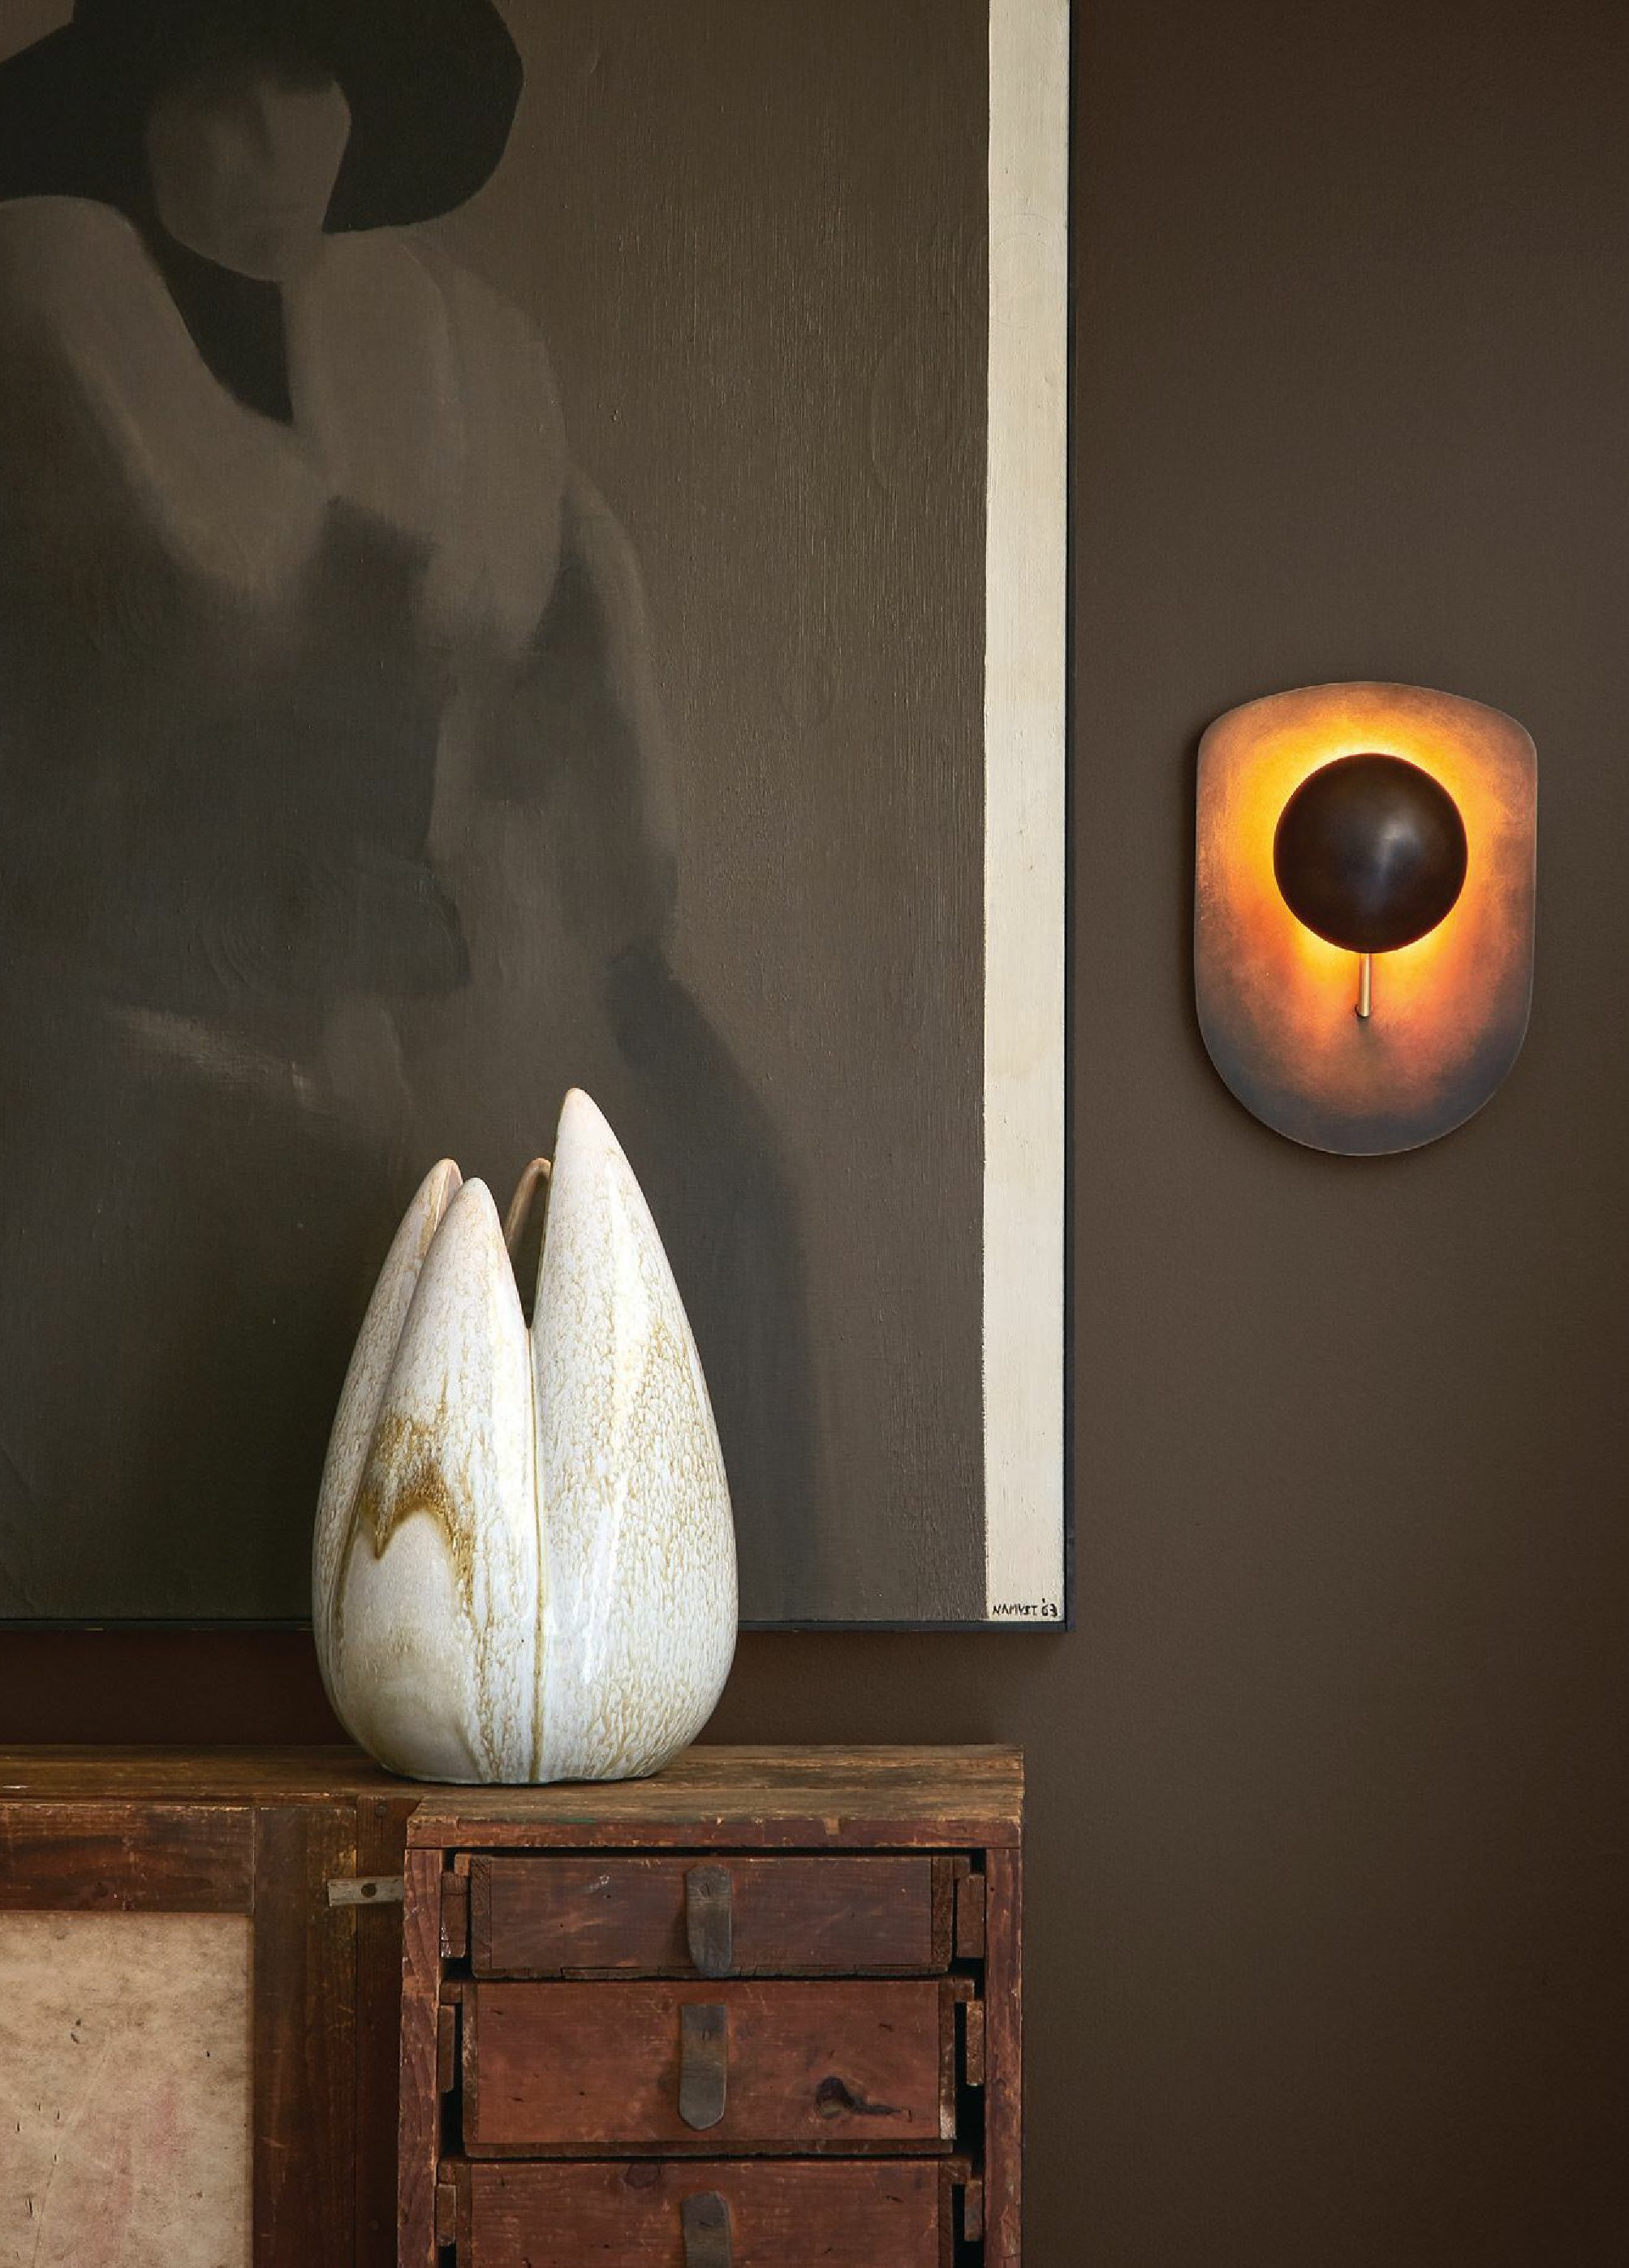 Hand-constructed and handsomely patinated, the Gil Melott Bespoke Luz SC Form 9 bronze sconce adds impressive warmth to any room. PHOTO BY RYAN MCDONALD